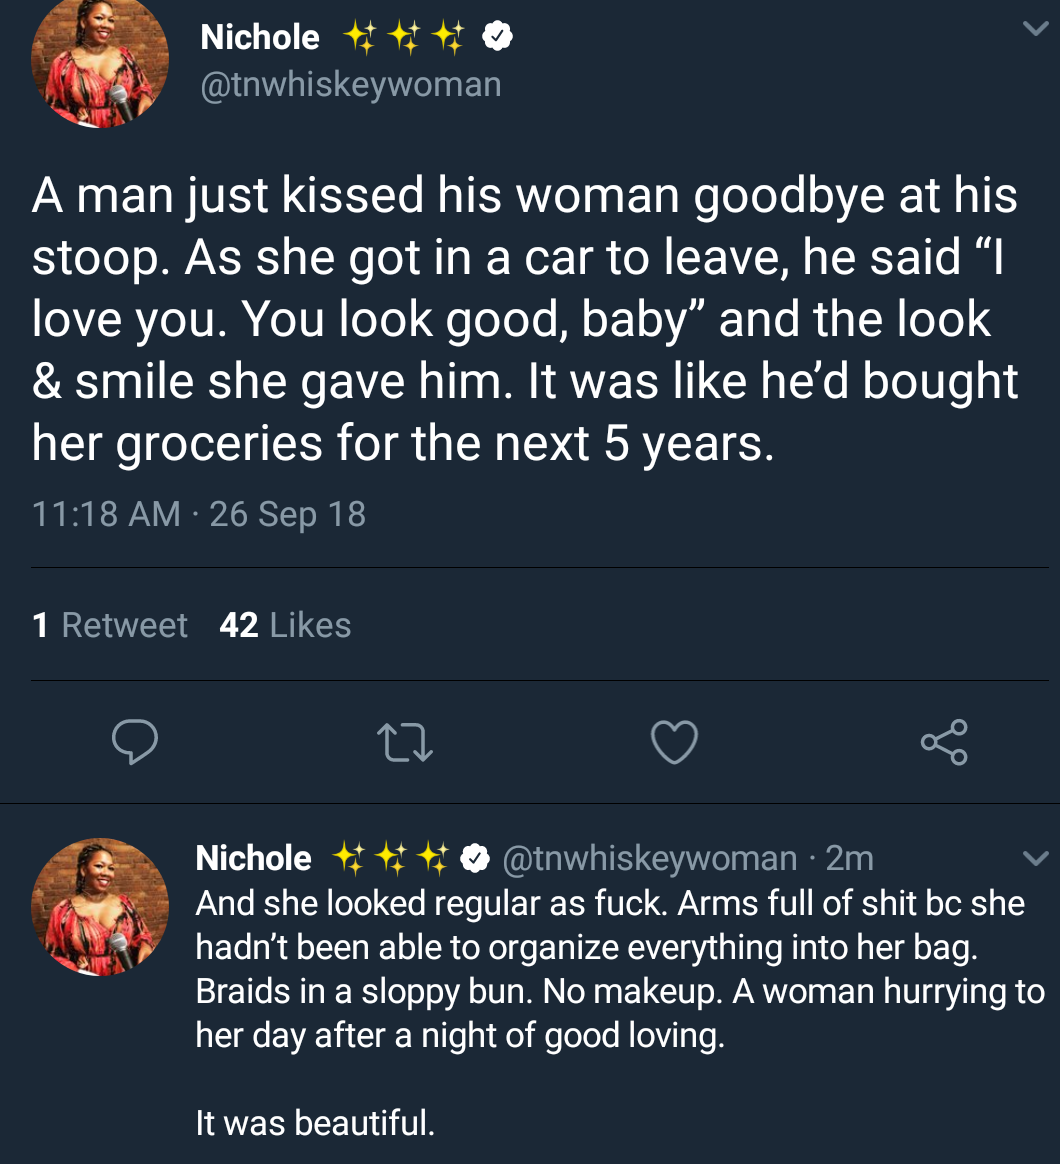 black twitter best of spaceghostpurrp twitter - Nichole A man just kissed his woman goodbye at his stoop. As she got in a car to leave, he said I love you. You look good, baby" and the look & smile she gave him. It was he'd bought her groceries for the ne